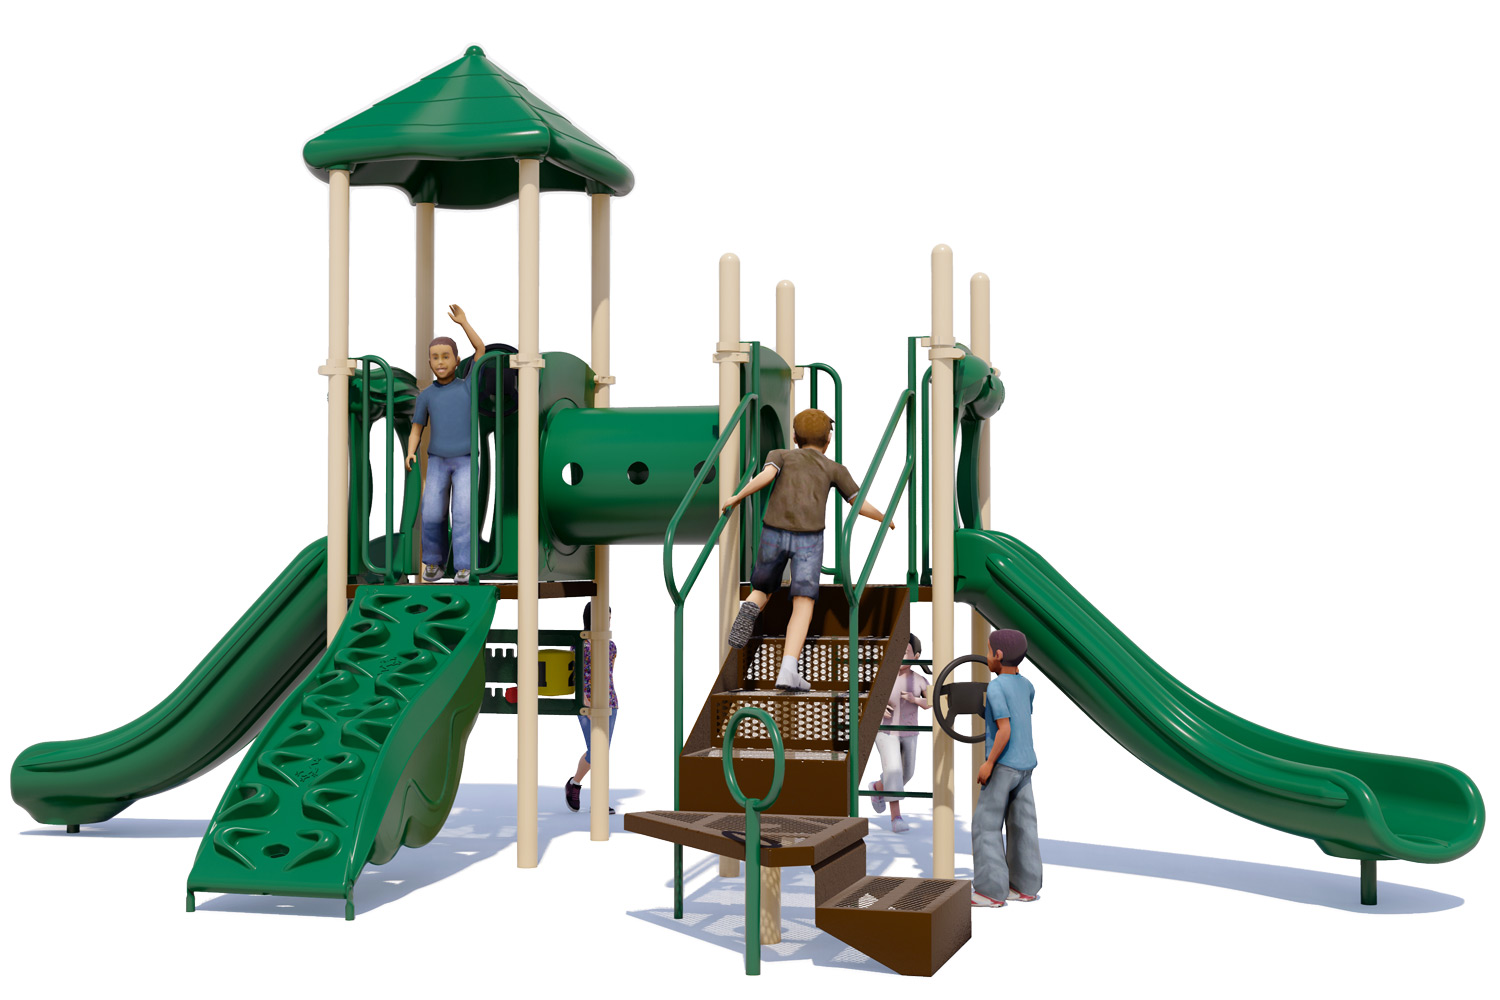 Play Date - Playground Equipment For Children Ages 2-12 - Natural - Back